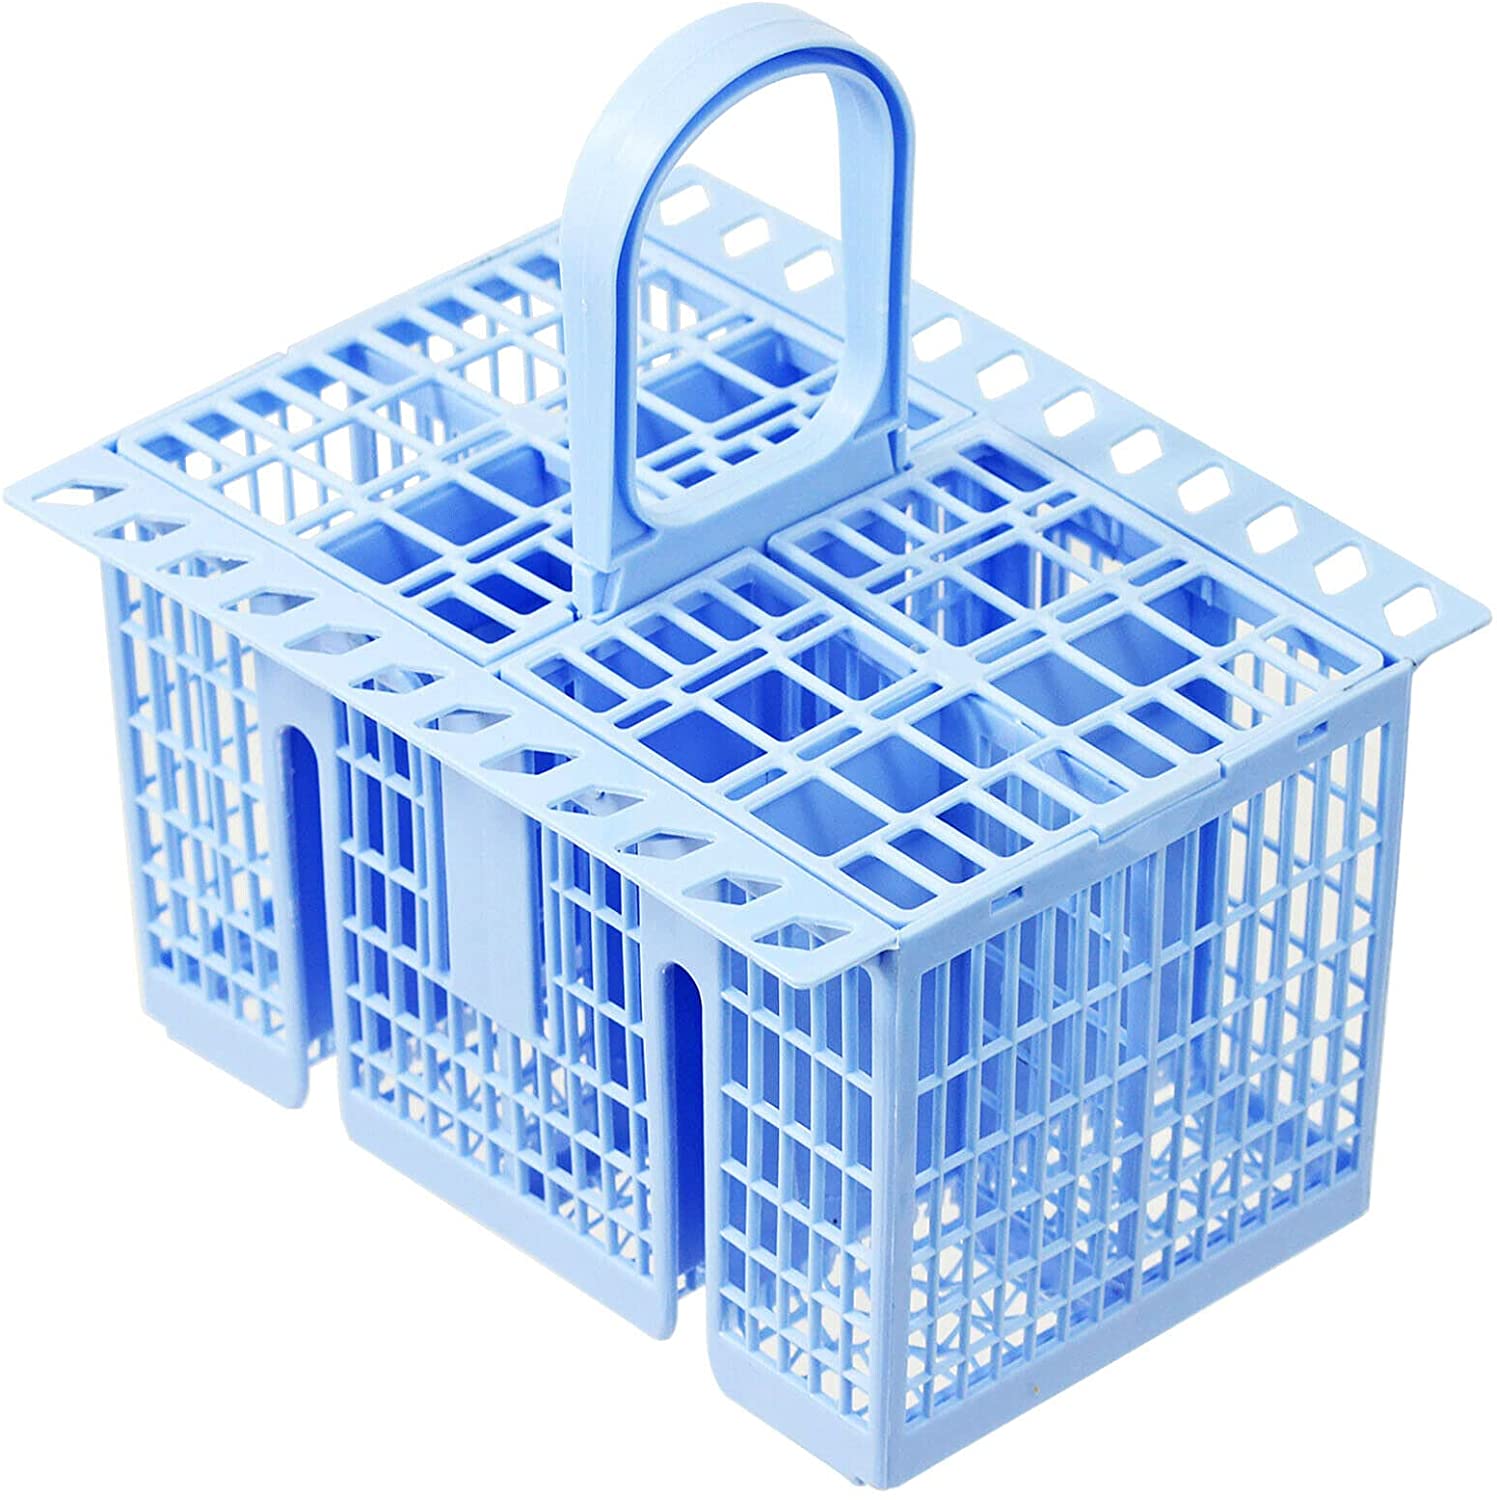 SPARES2GO Cutlery Basket compatible with Electrolux Dishwasher (Blue, 220 x 208 x 160mm)